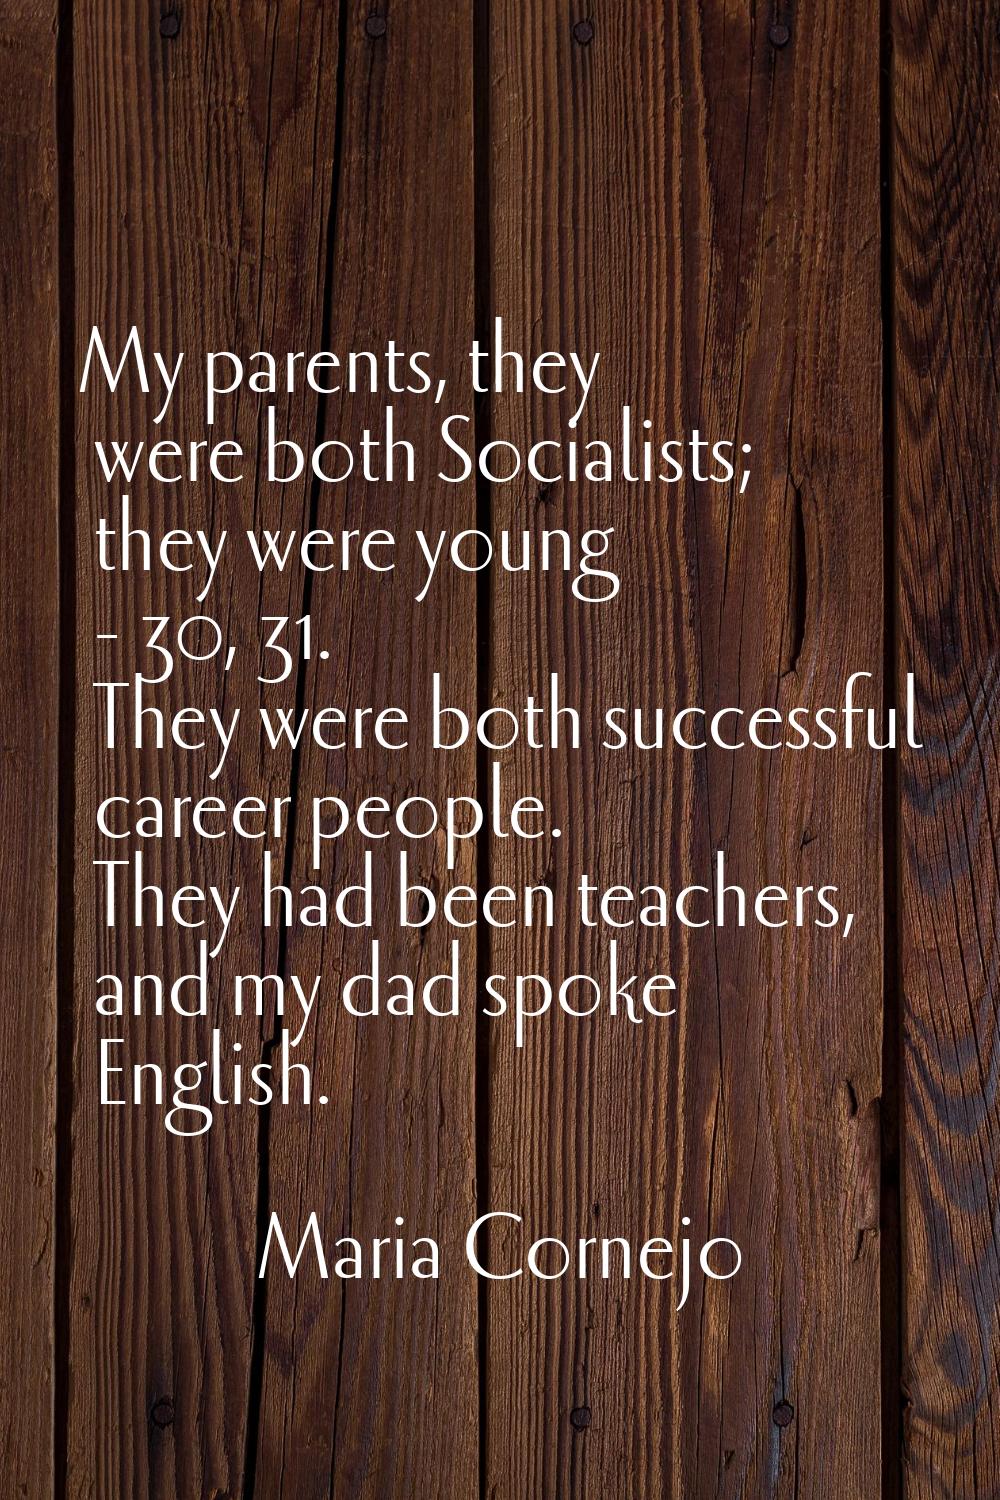 My parents, they were both Socialists; they were young - 30, 31. They were both successful career p